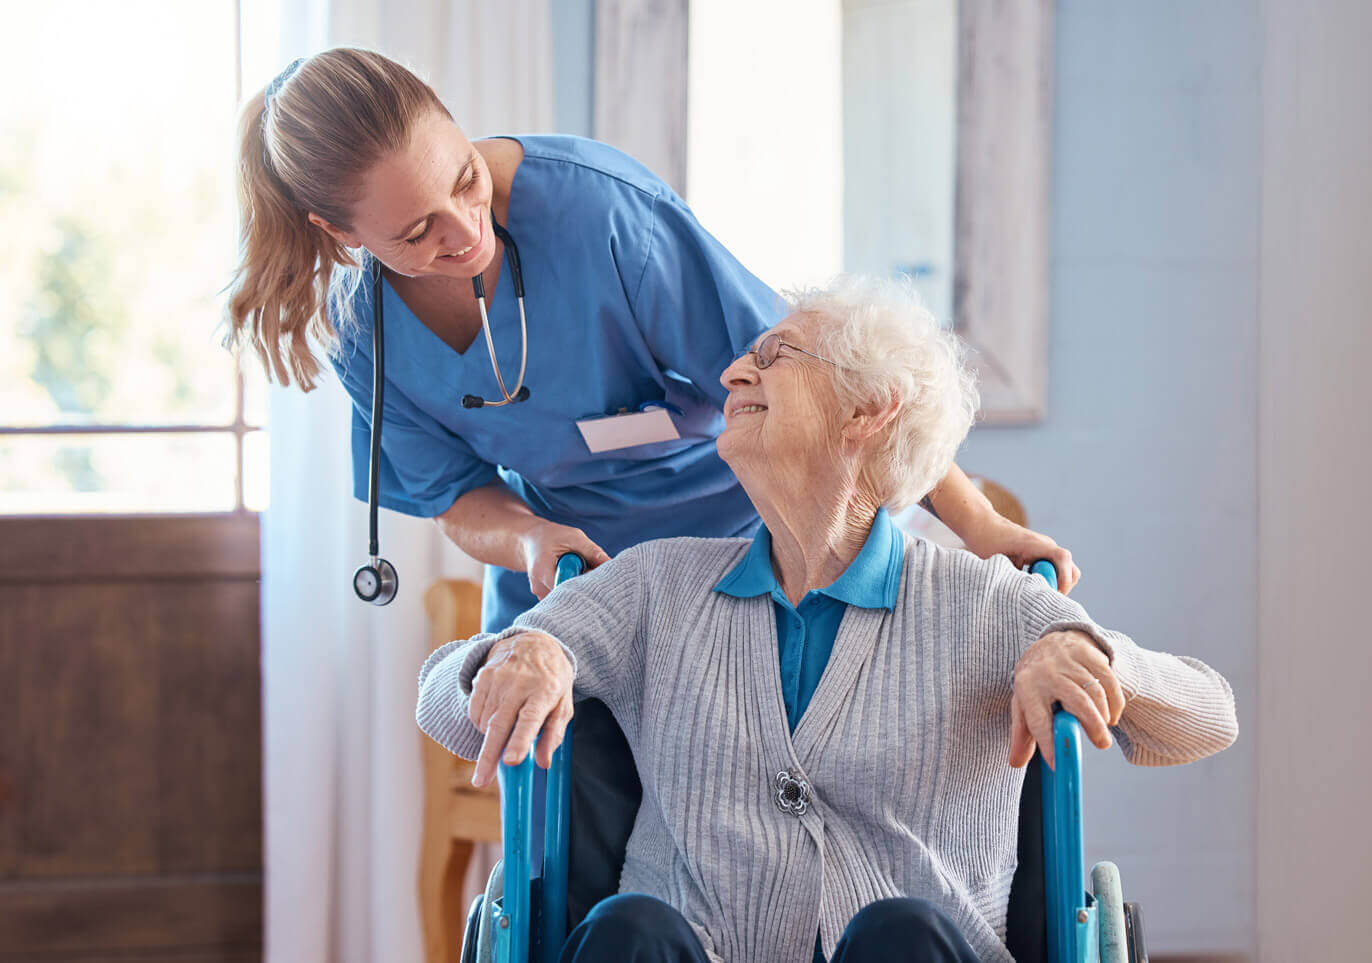 Basic Home Care Skills for Home Caregivers (Home-Based)